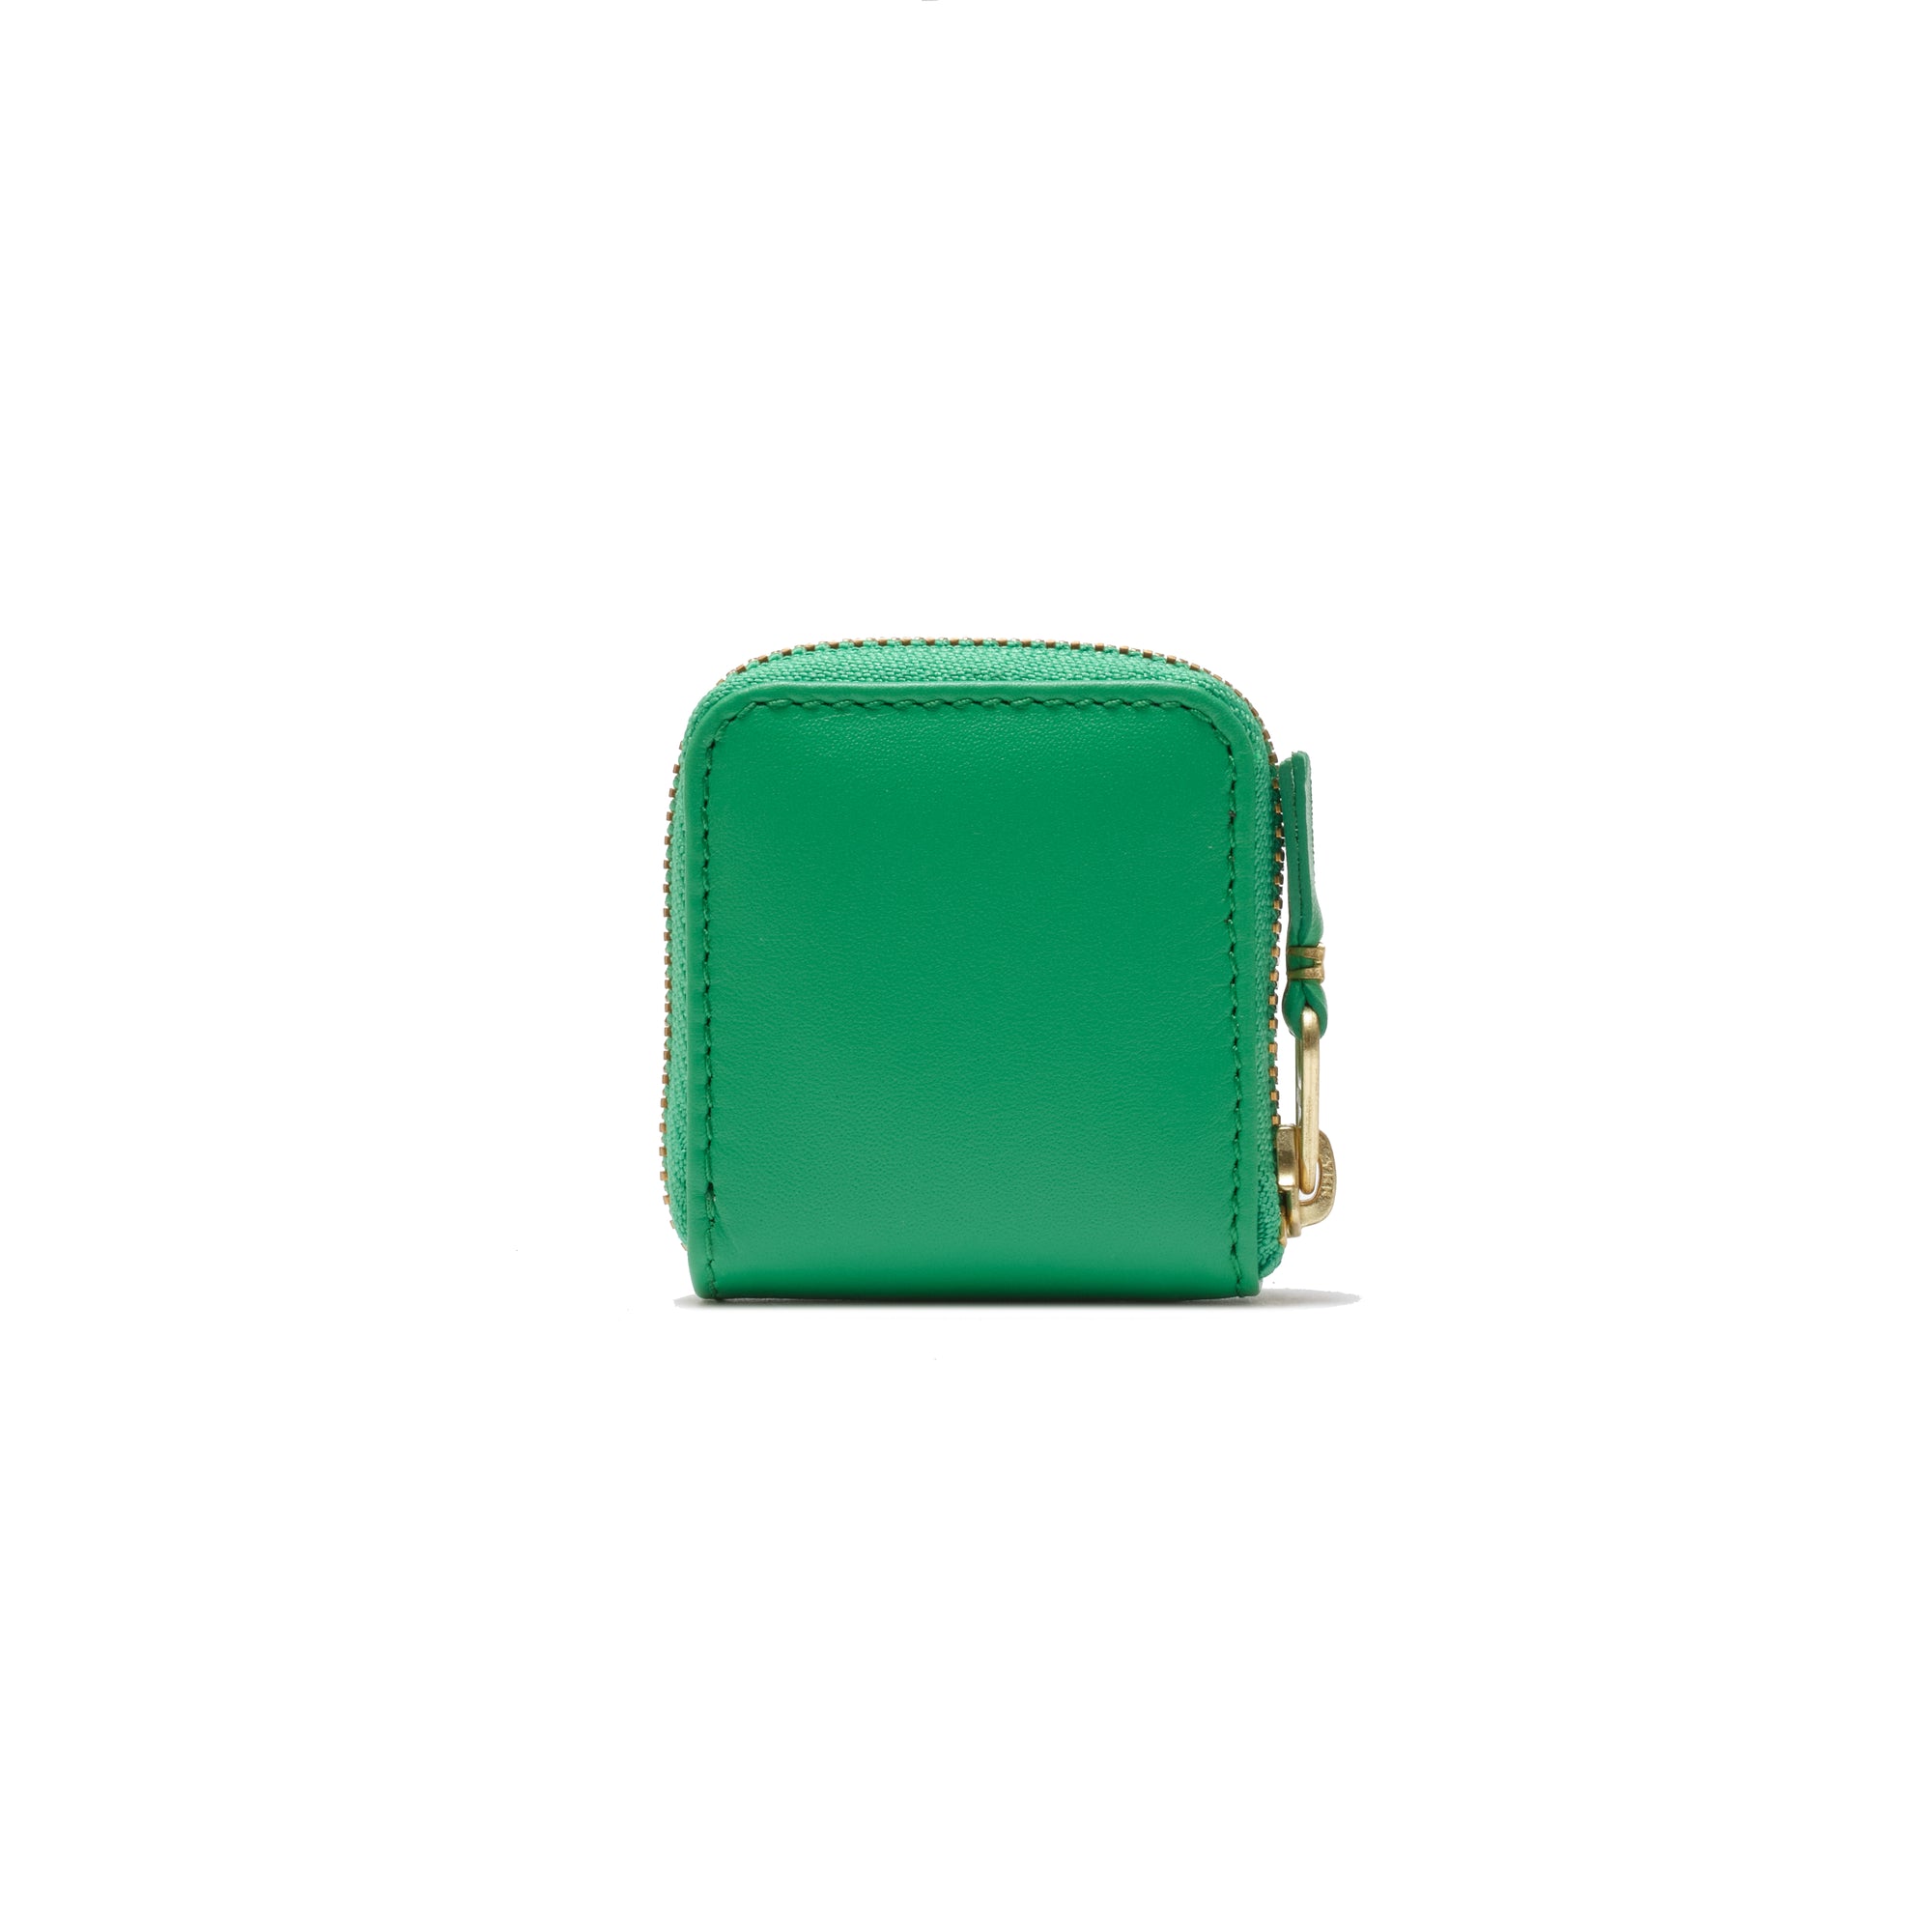 CDG WALLET - Colored Leather Line-8Z-A041 - (Green) view 2